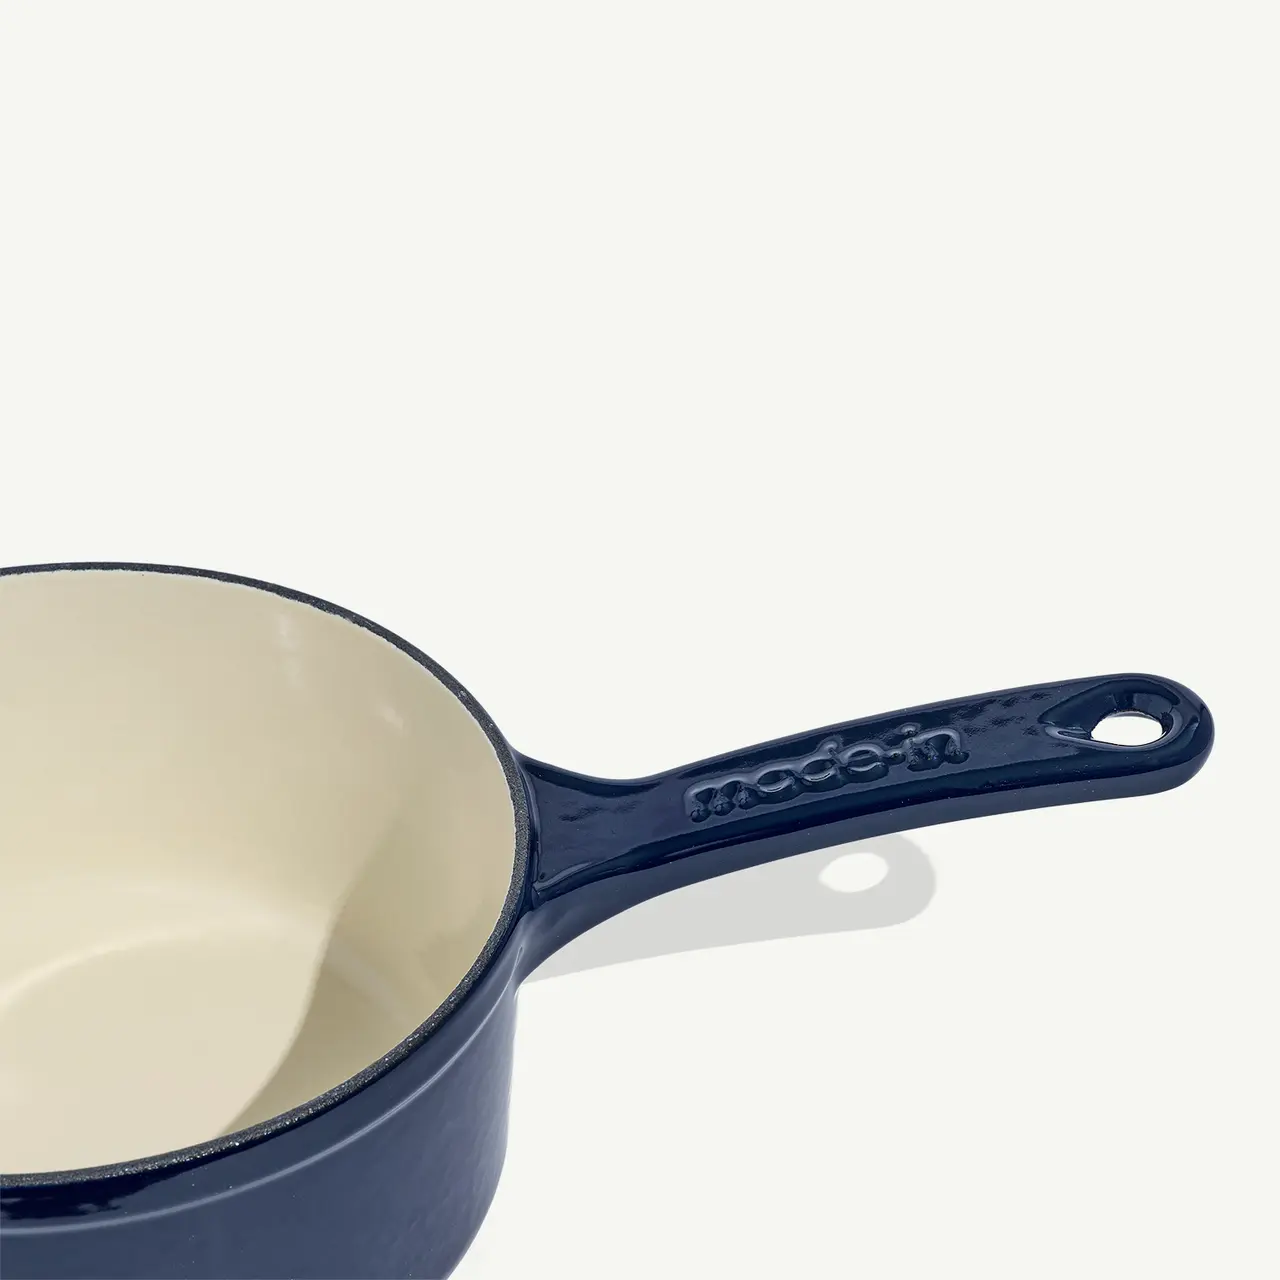 A blue ceramic saucepan with a cream interior and the word "modern" embossed on the handle sits against a light background.